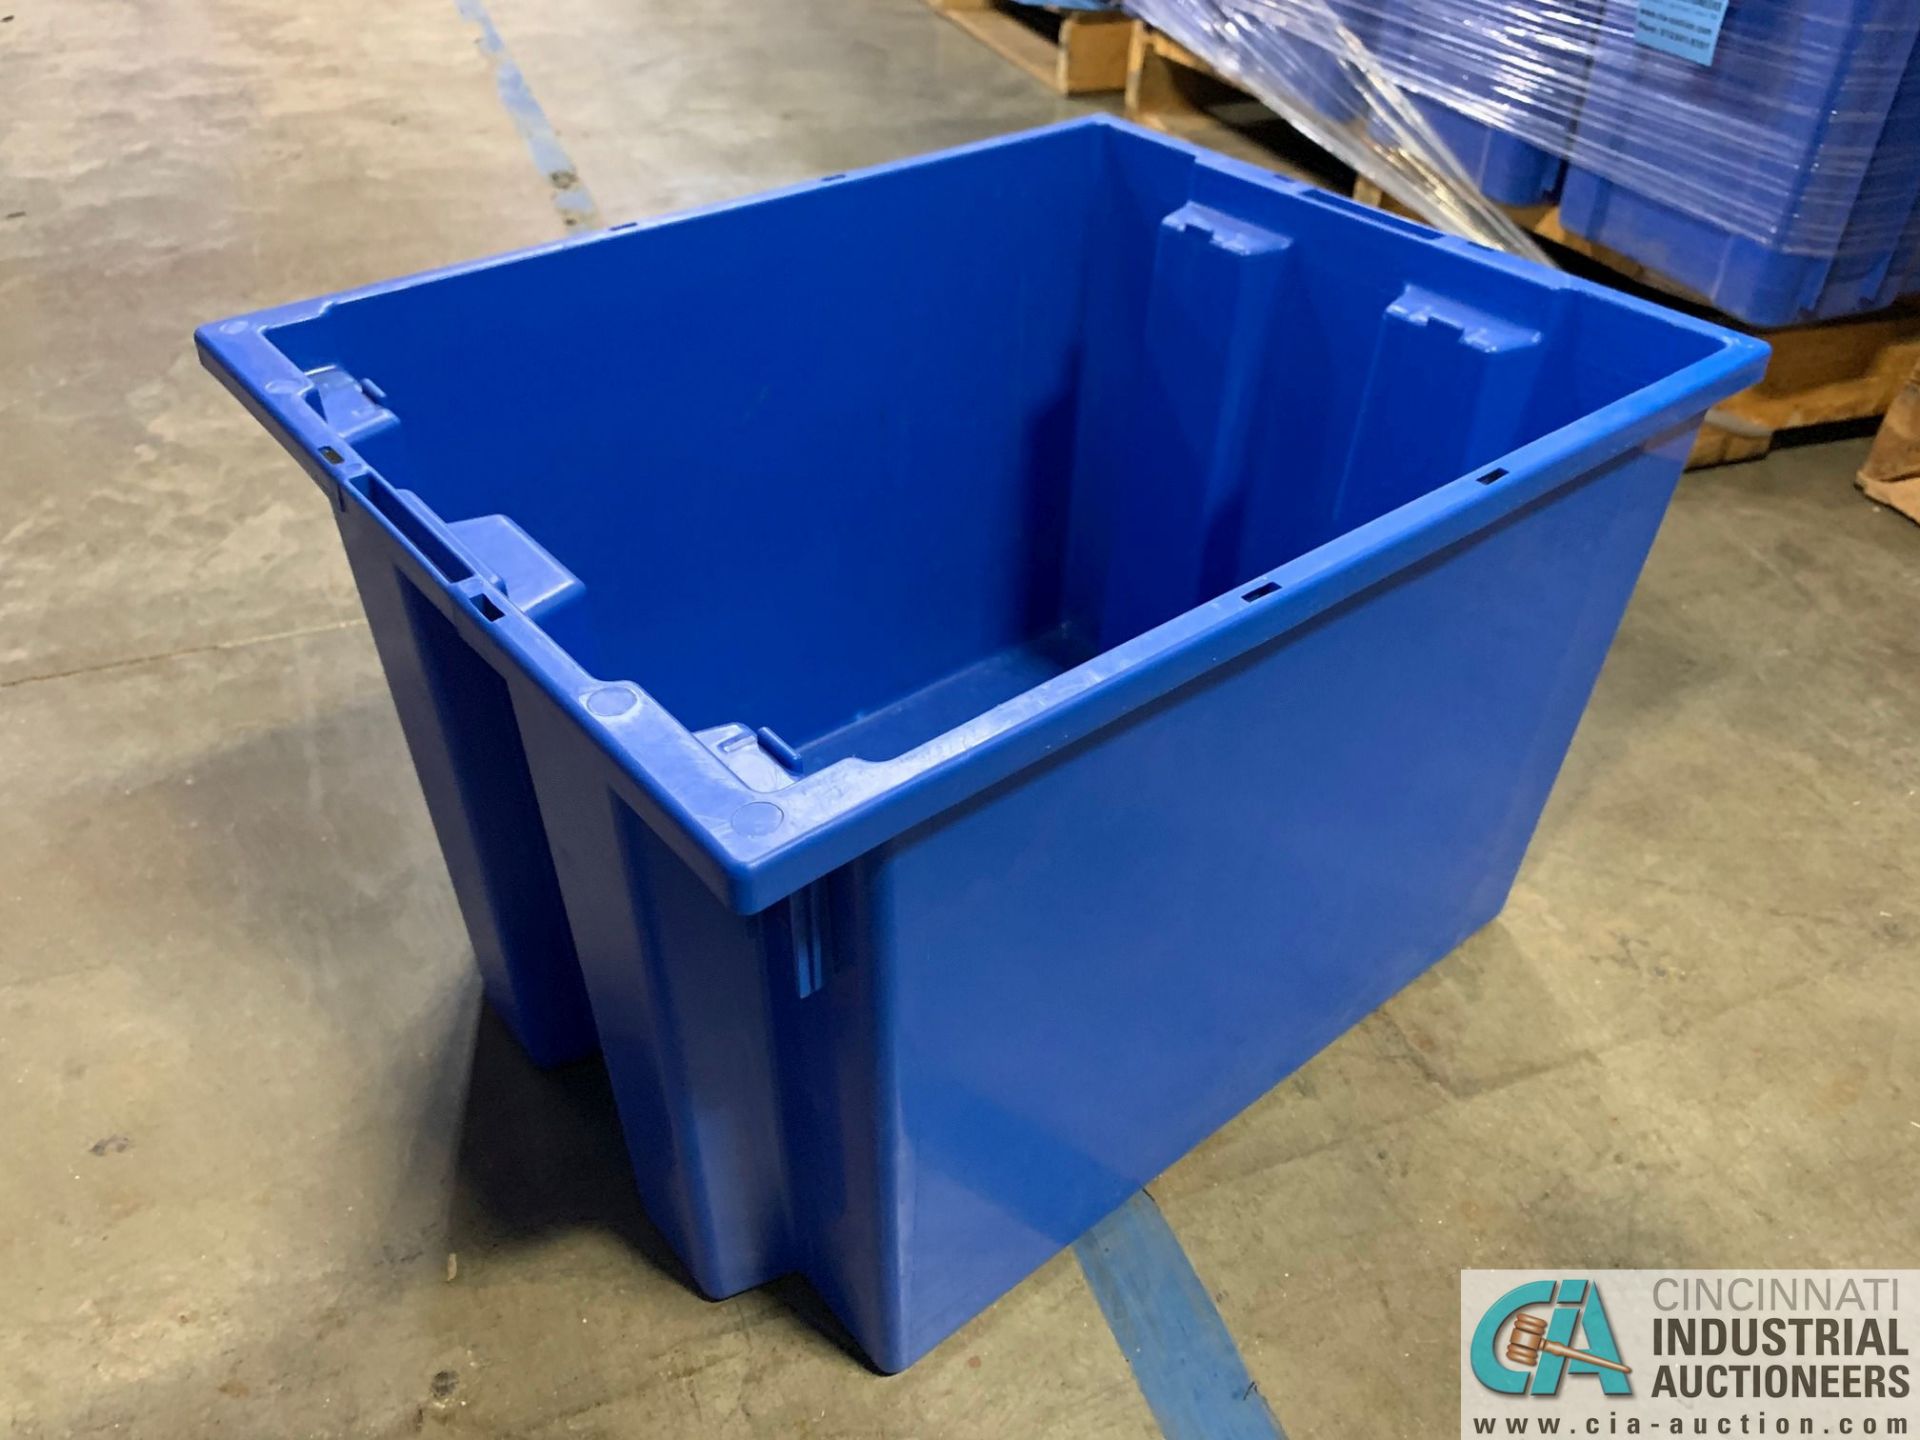 AKRO-MILS PRODUCT NO. 35-195 NEST AND STACK PLASTIC TOTES - (2) SKIDS - Image 4 of 4